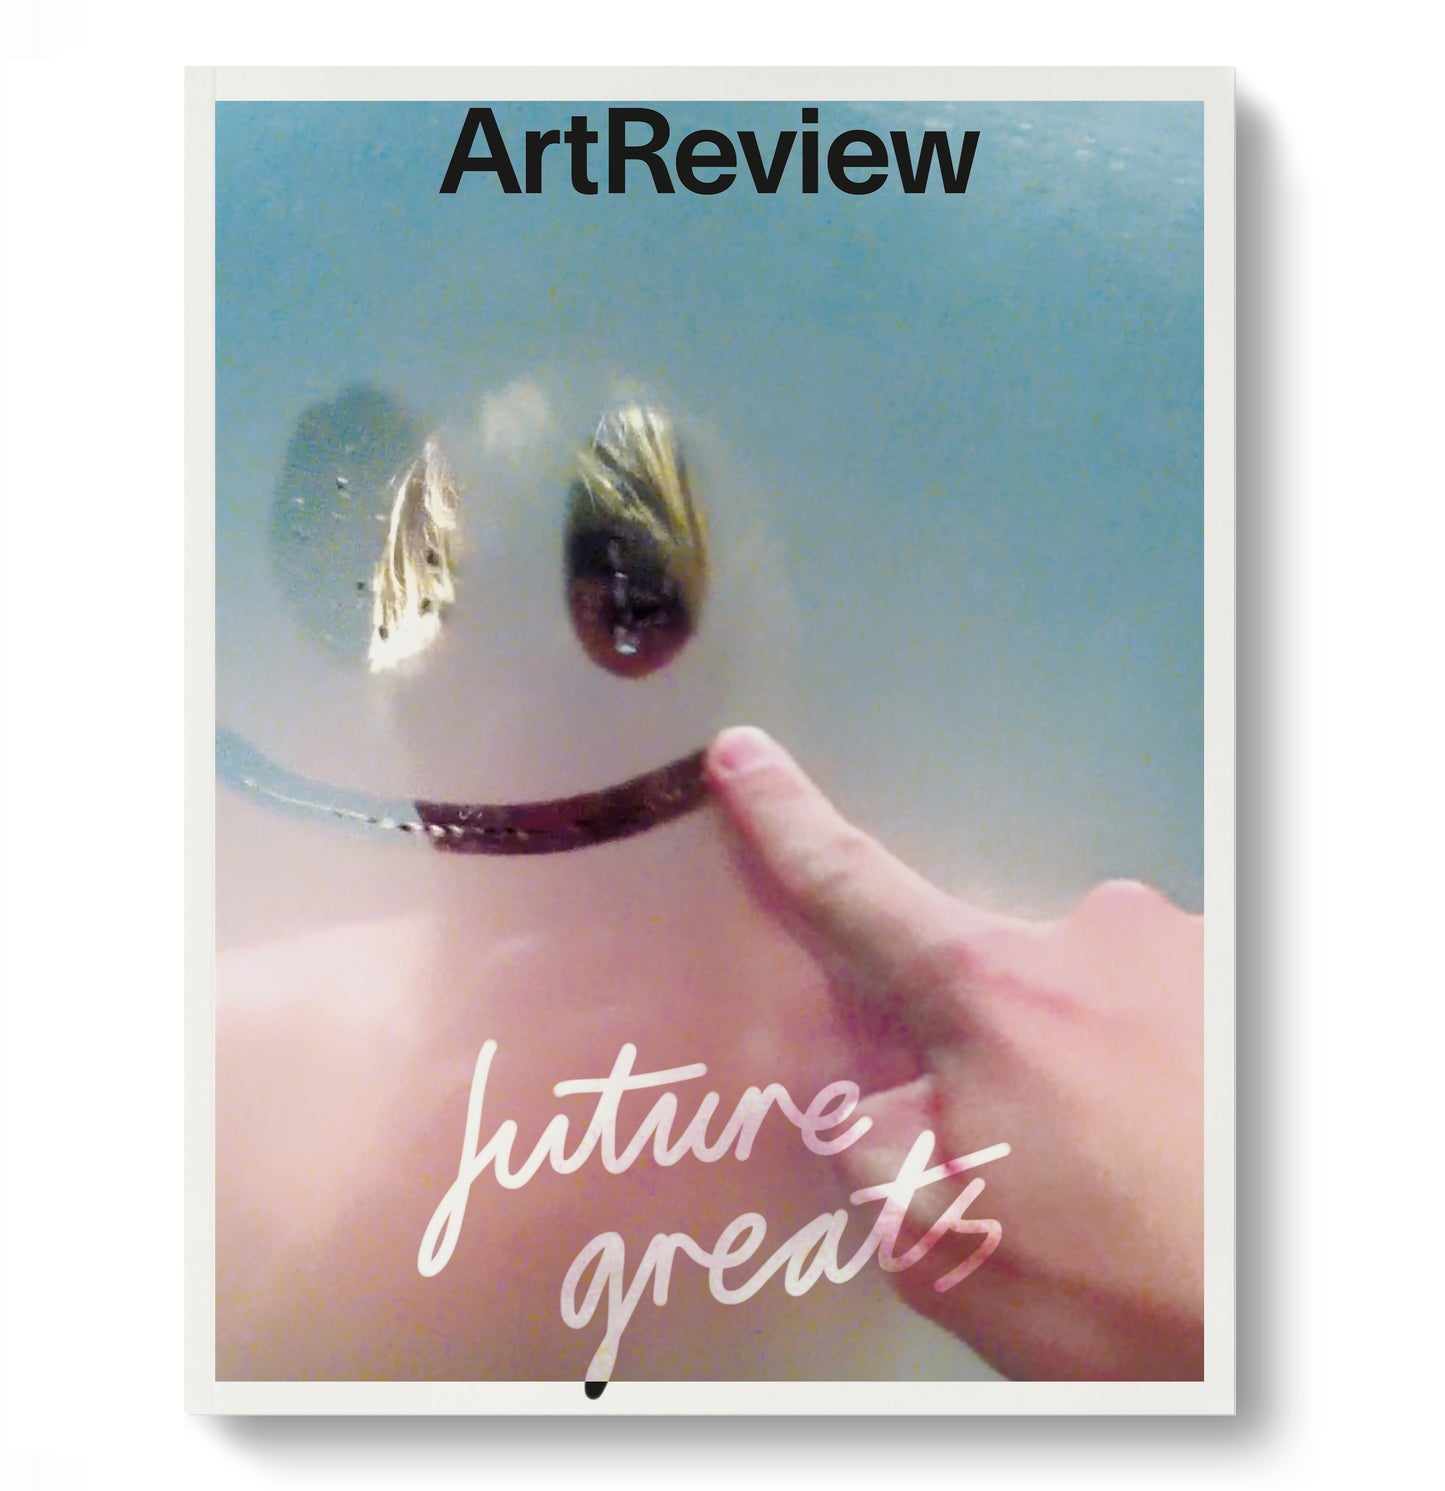 ArtReview March 2015 - Future Greats